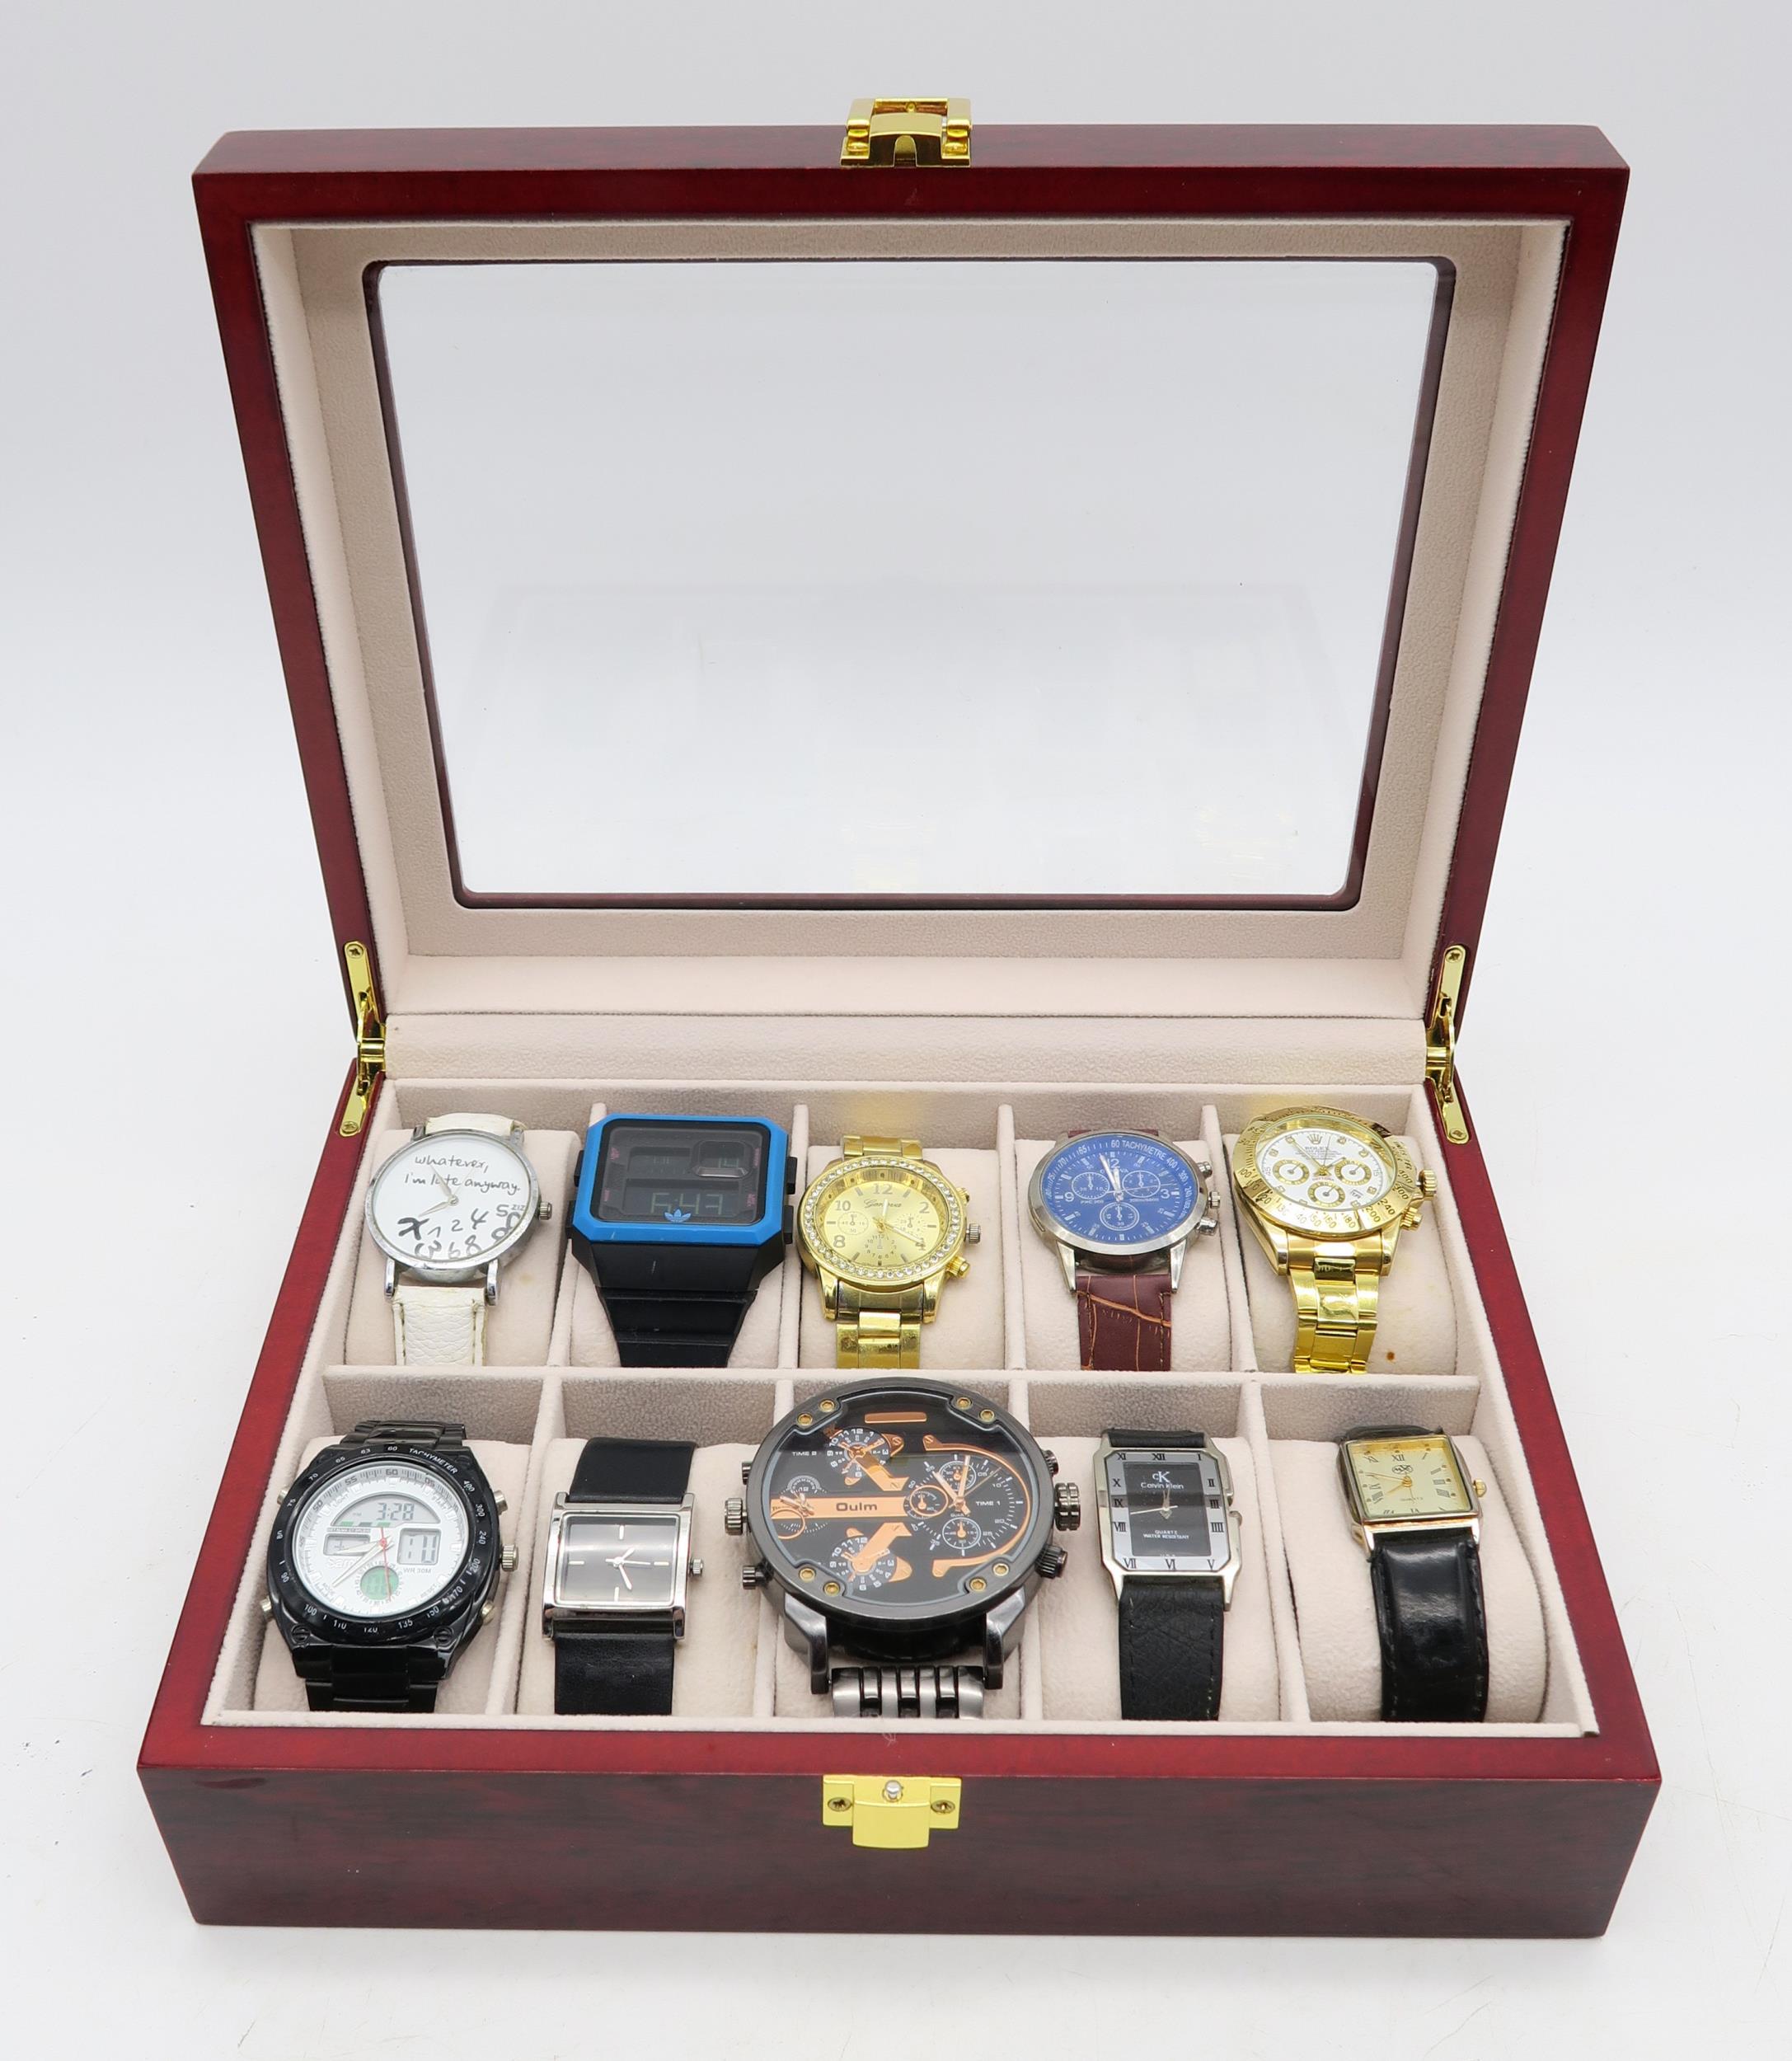 A collection of ten quartz fashion wristwatches, to include a Rolex replica and an Adidas digital